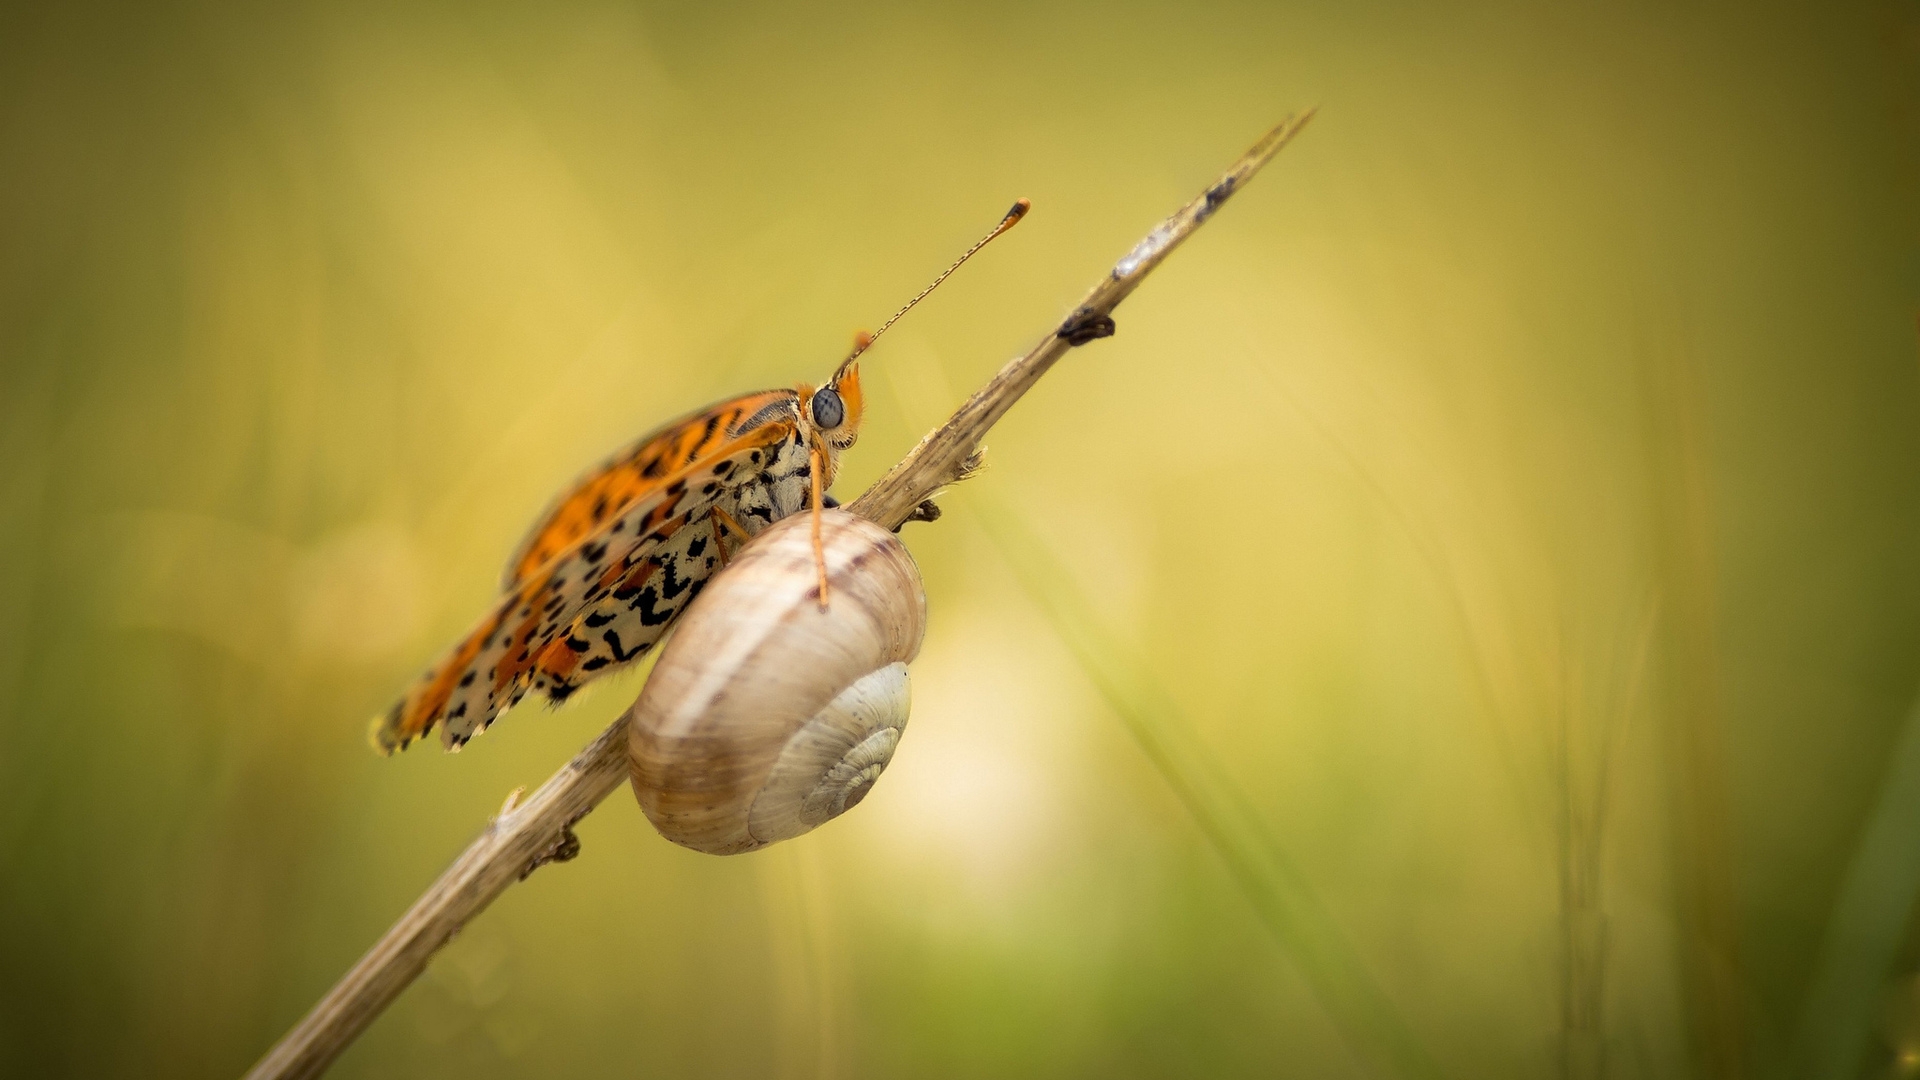 Snail and Butterfly for 1920 x 1080 HDTV 1080p resolution